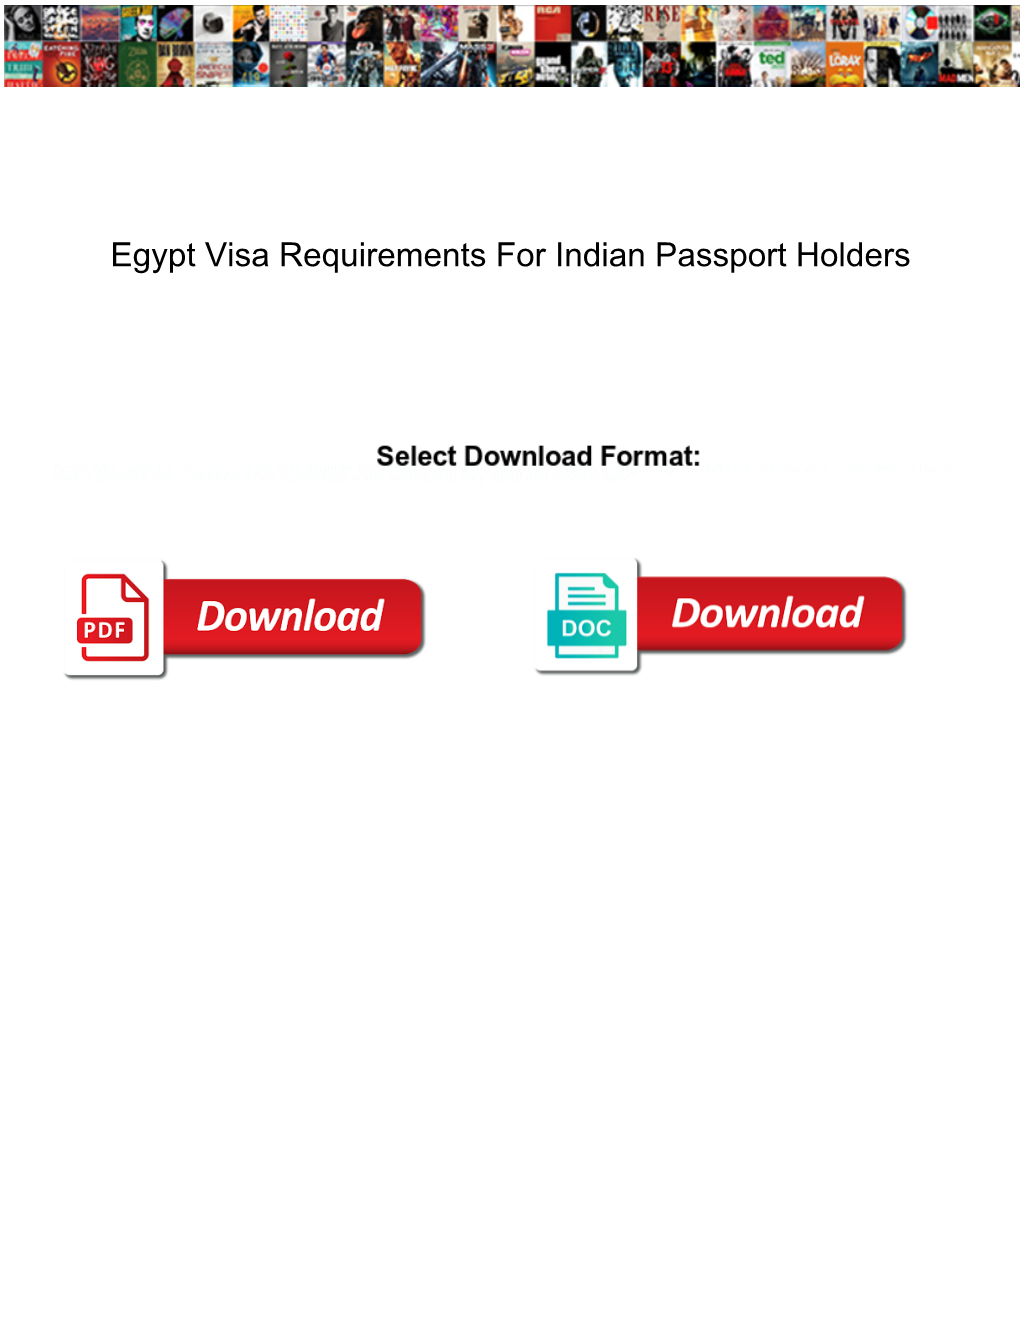 Egypt Visa Requirements for Indian Passport Holders